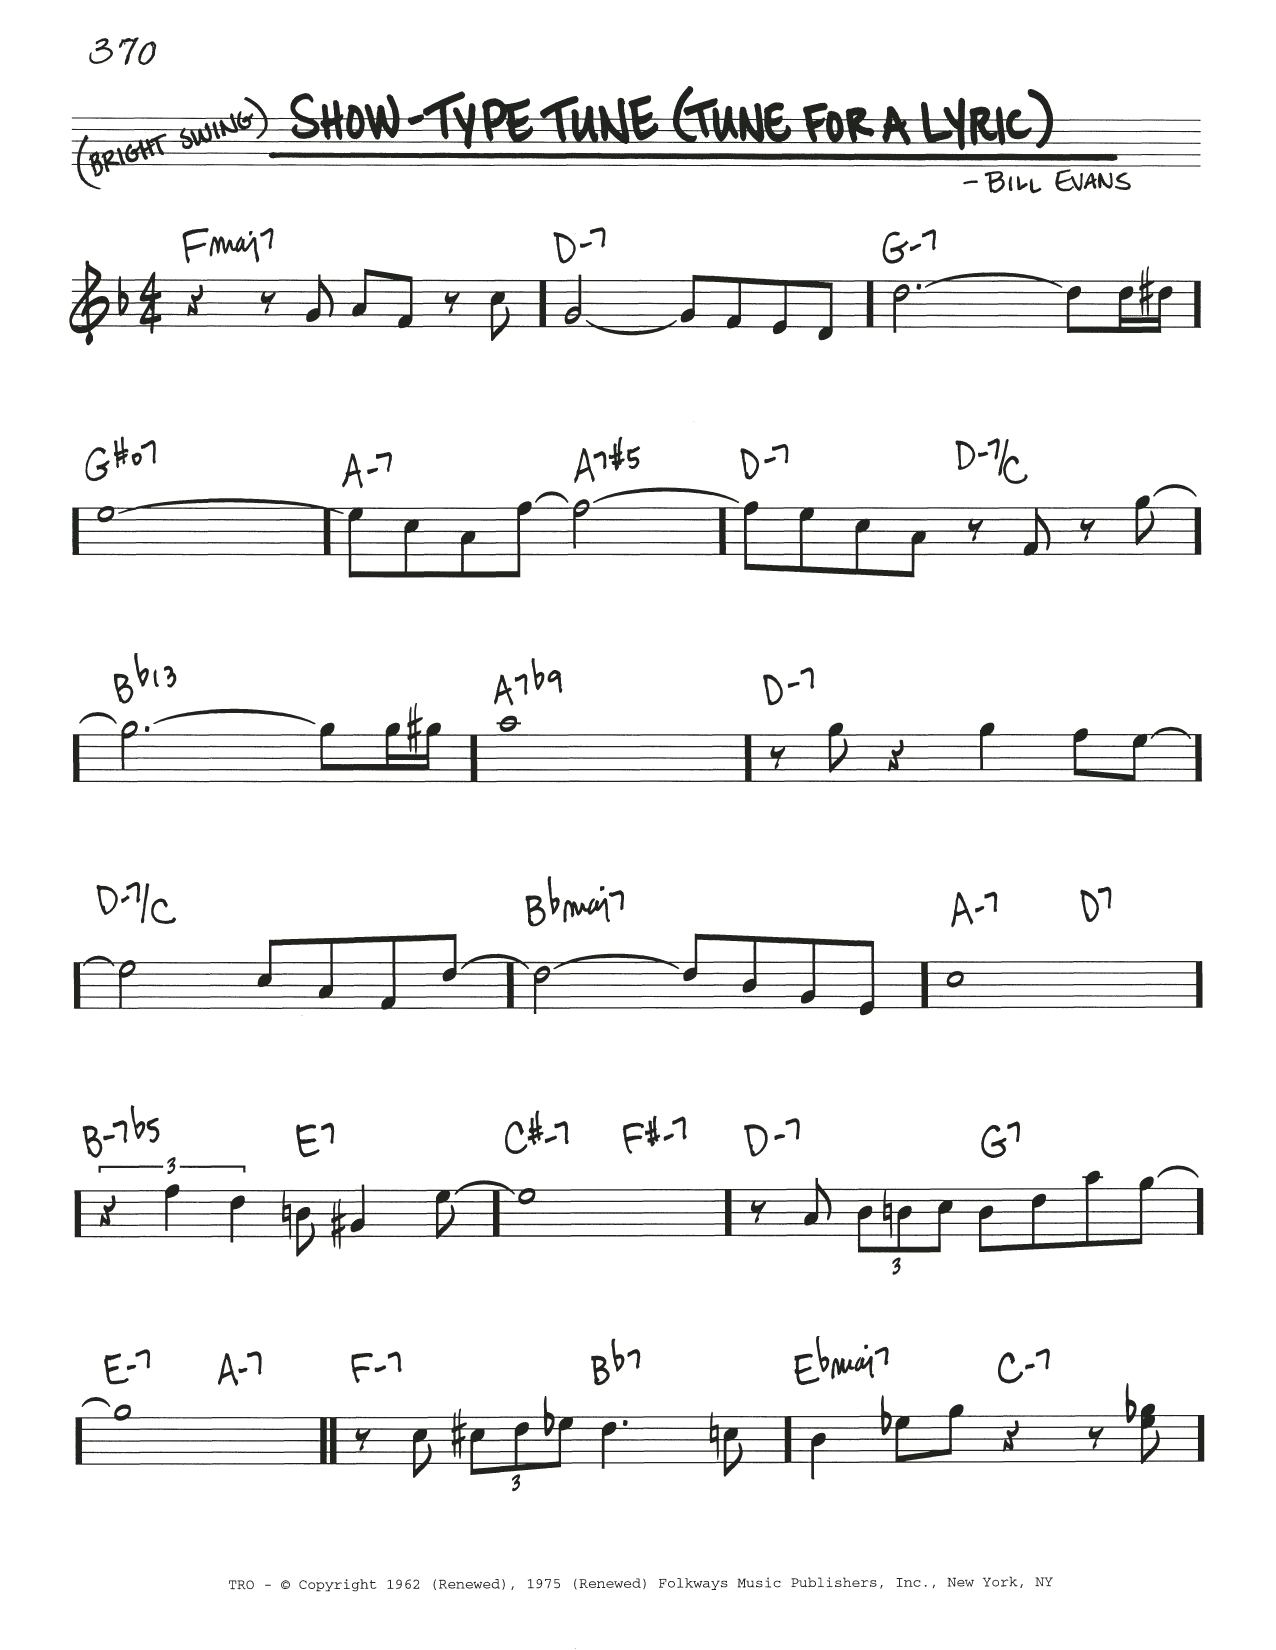 Download Bill Evans Show-Type Tune (Tune For A Lyric) Sheet Music